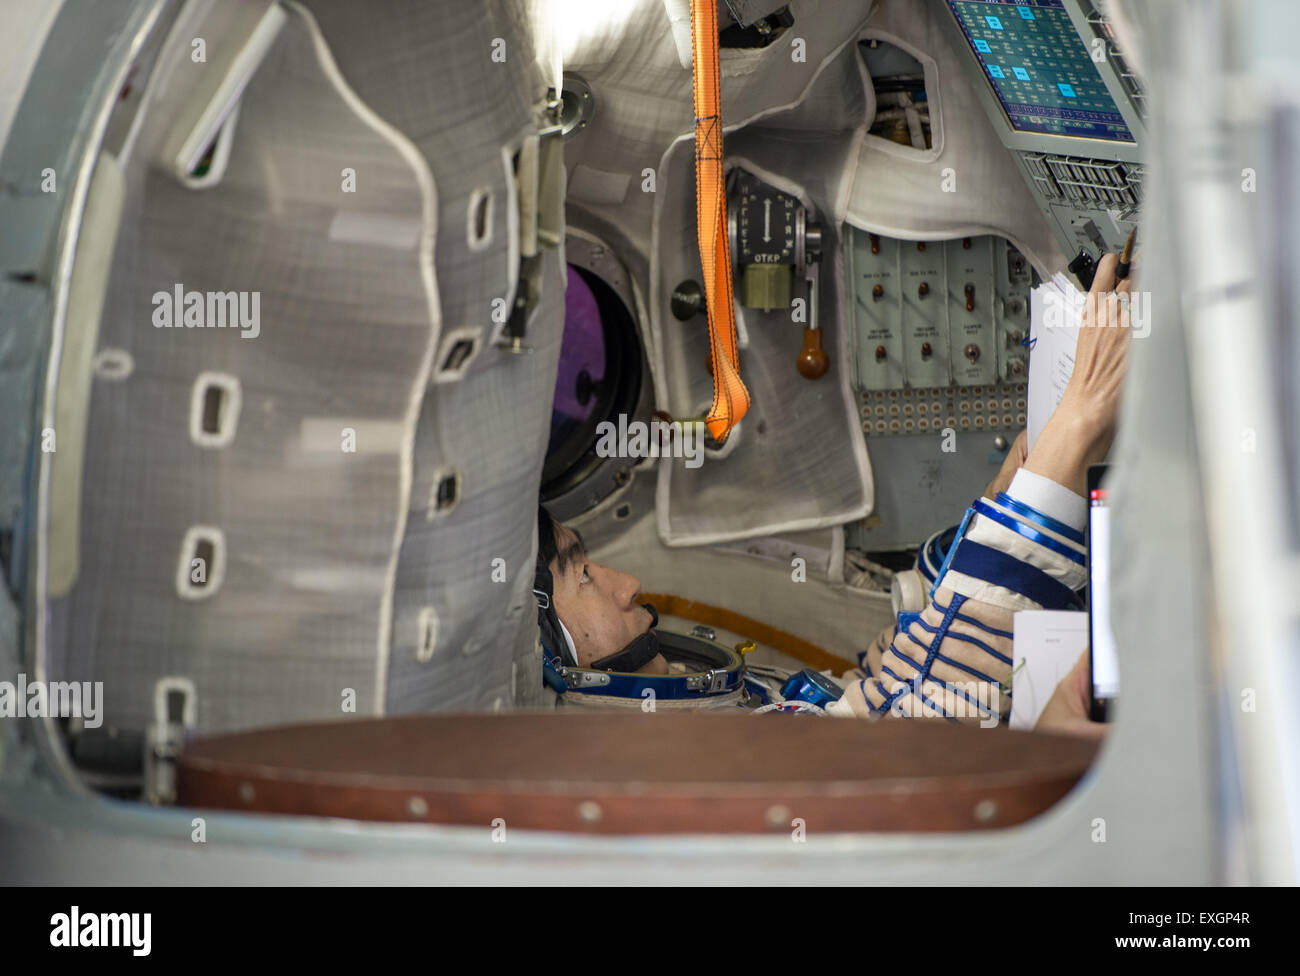 Japan Aerospace Exploration Agency astronaut Kimiya Yui participates in the second day of qualification exams with Russian cosmonaut Oleg Kononenko and NASA astronaut Kjell Lindgren, Thursday, May 7, 2015 at the Gagarin Cosmonaut Training Center (GCTC) in Star City, Russia. The Expedition 44/45 trio is preparing for launch to the International Space Station in their Soyuz TMA-17M spacecraft from the Baikonur Cosmodrome in Kazakhstan. Stock Photo